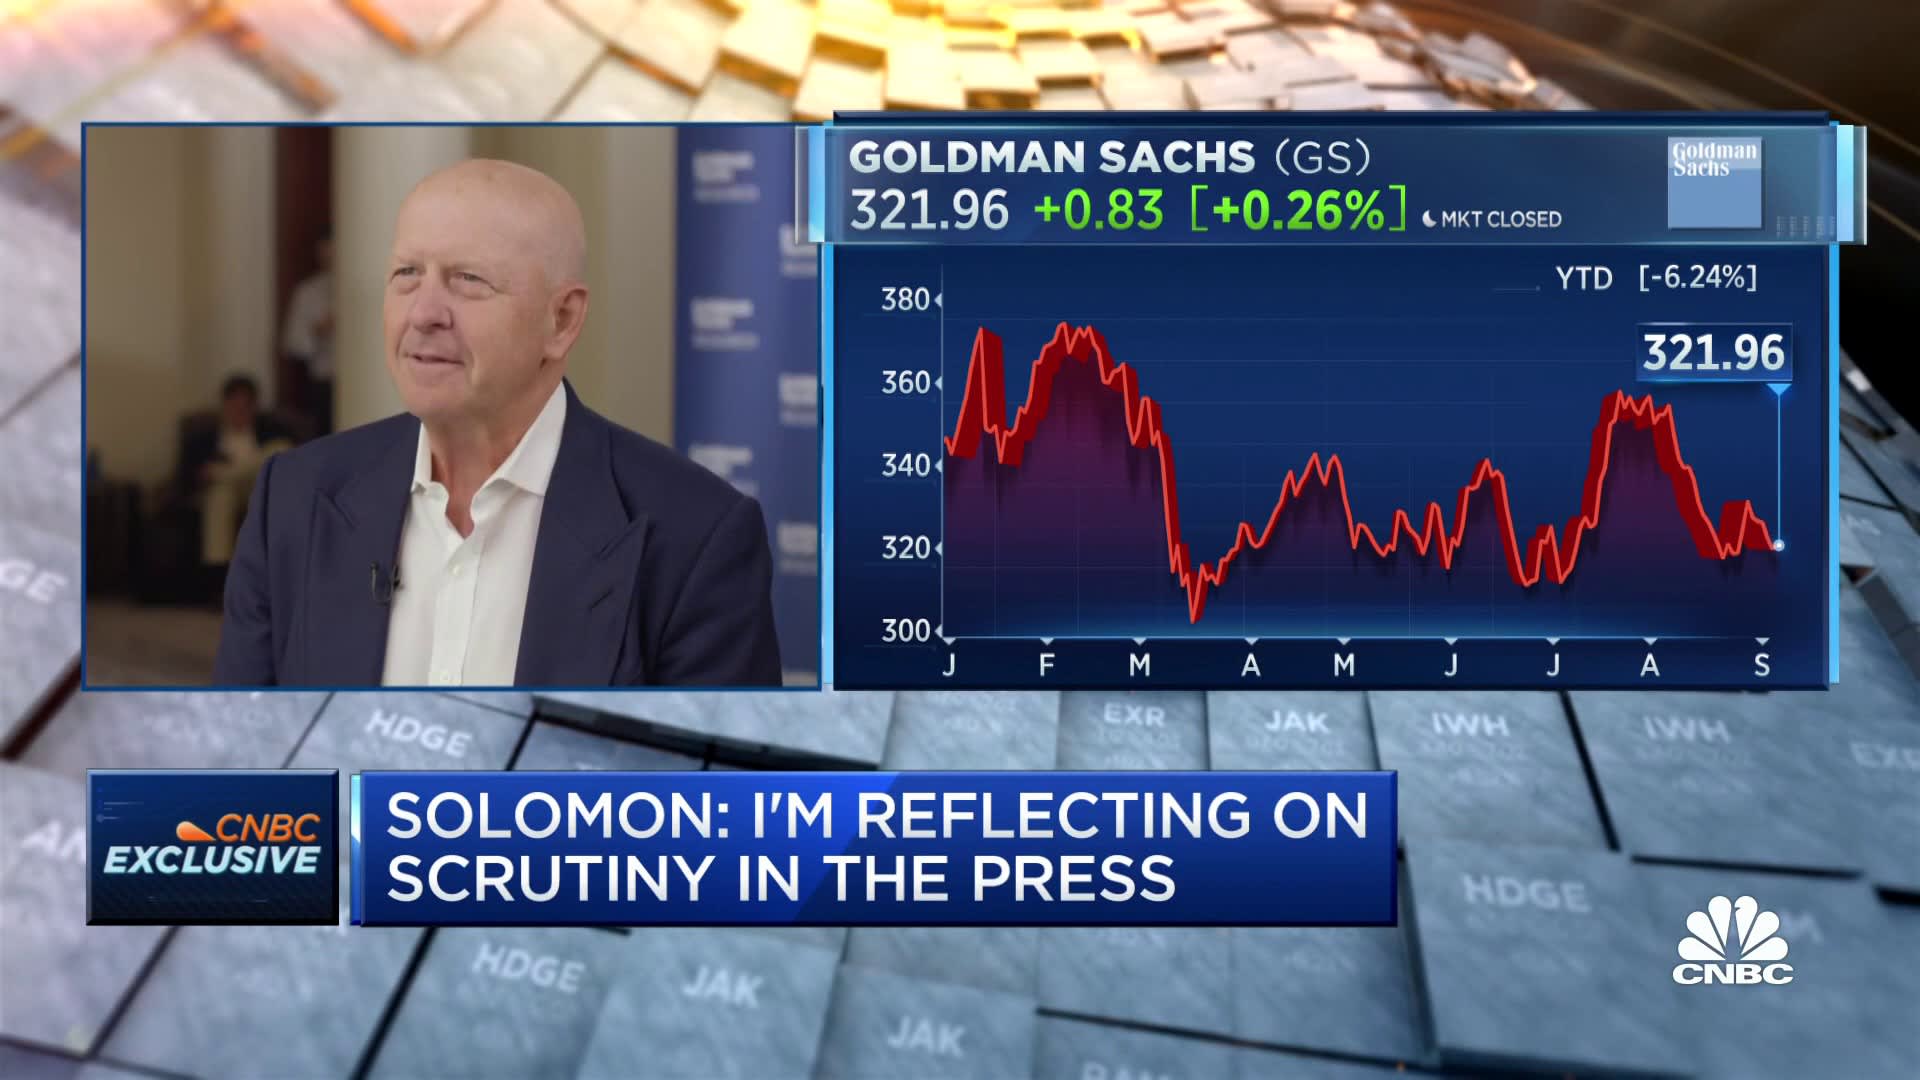 Goldman Sachs CEO Solomon: I don't recognize this caricature that's been painted of me